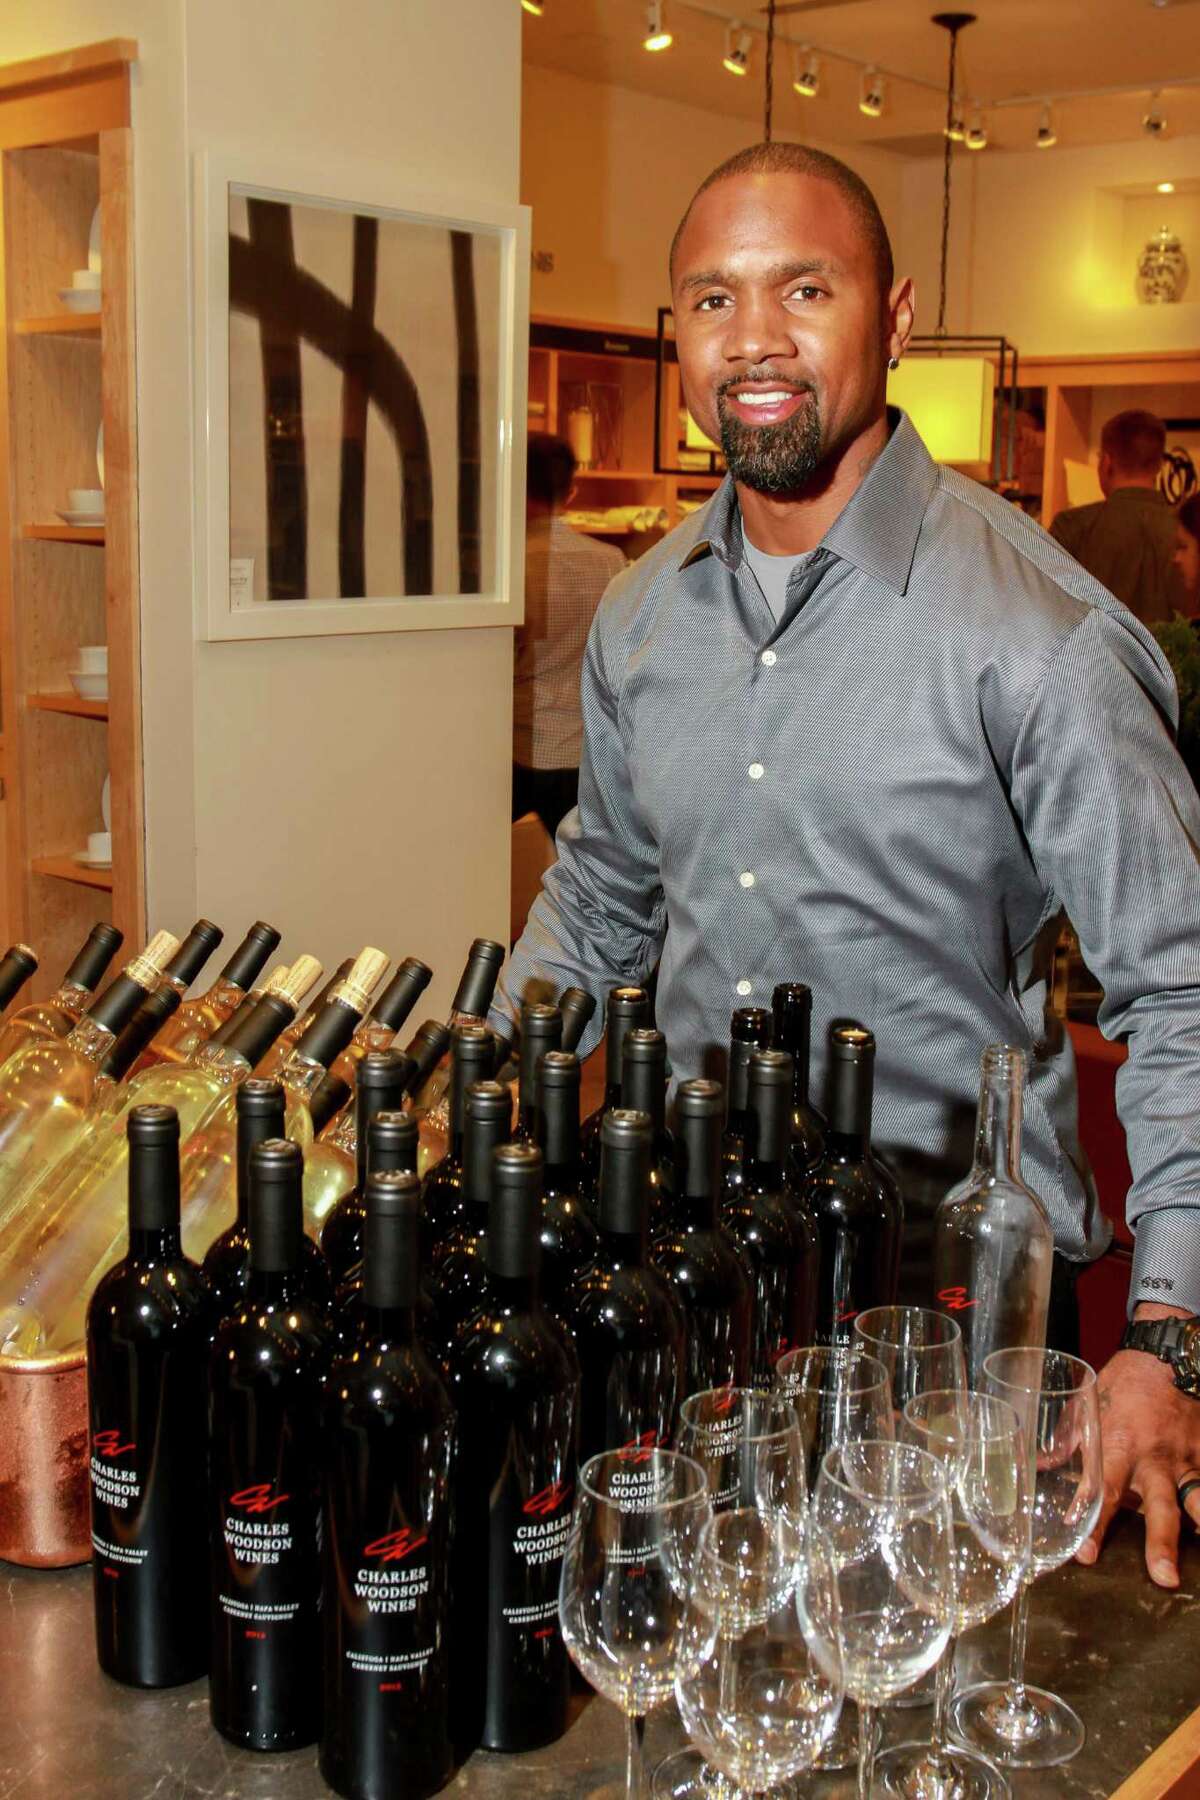 Charles Woodson with a display of his wine at Williams Sonoma. Woodson's wines were served at the Culinary Cookoff.